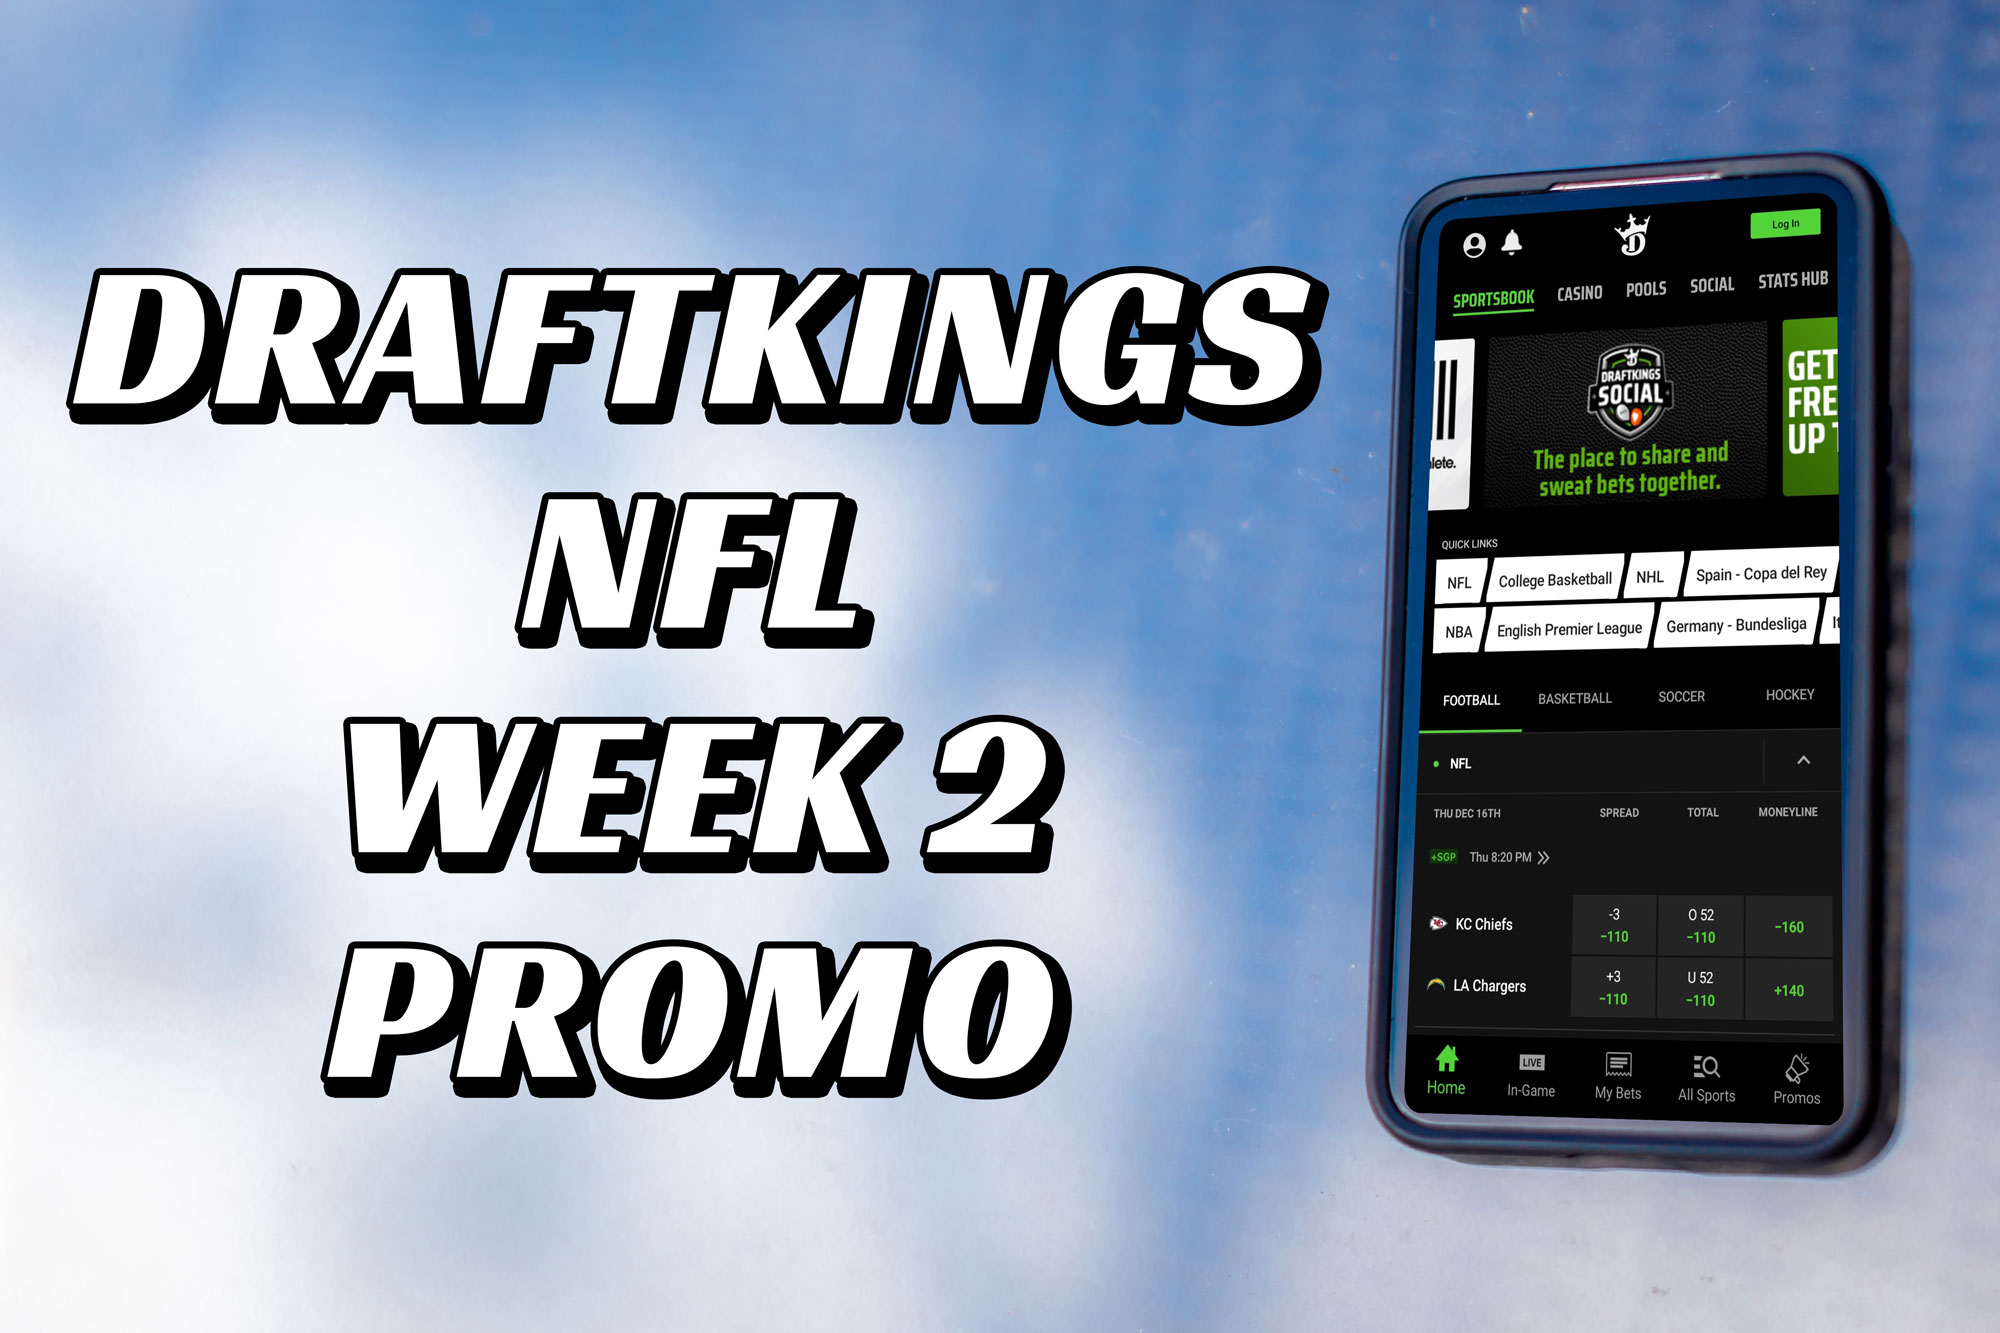 Jets vs. Cowboys picks: Best player prop bets for Week 2 NFL matchup -  DraftKings Network